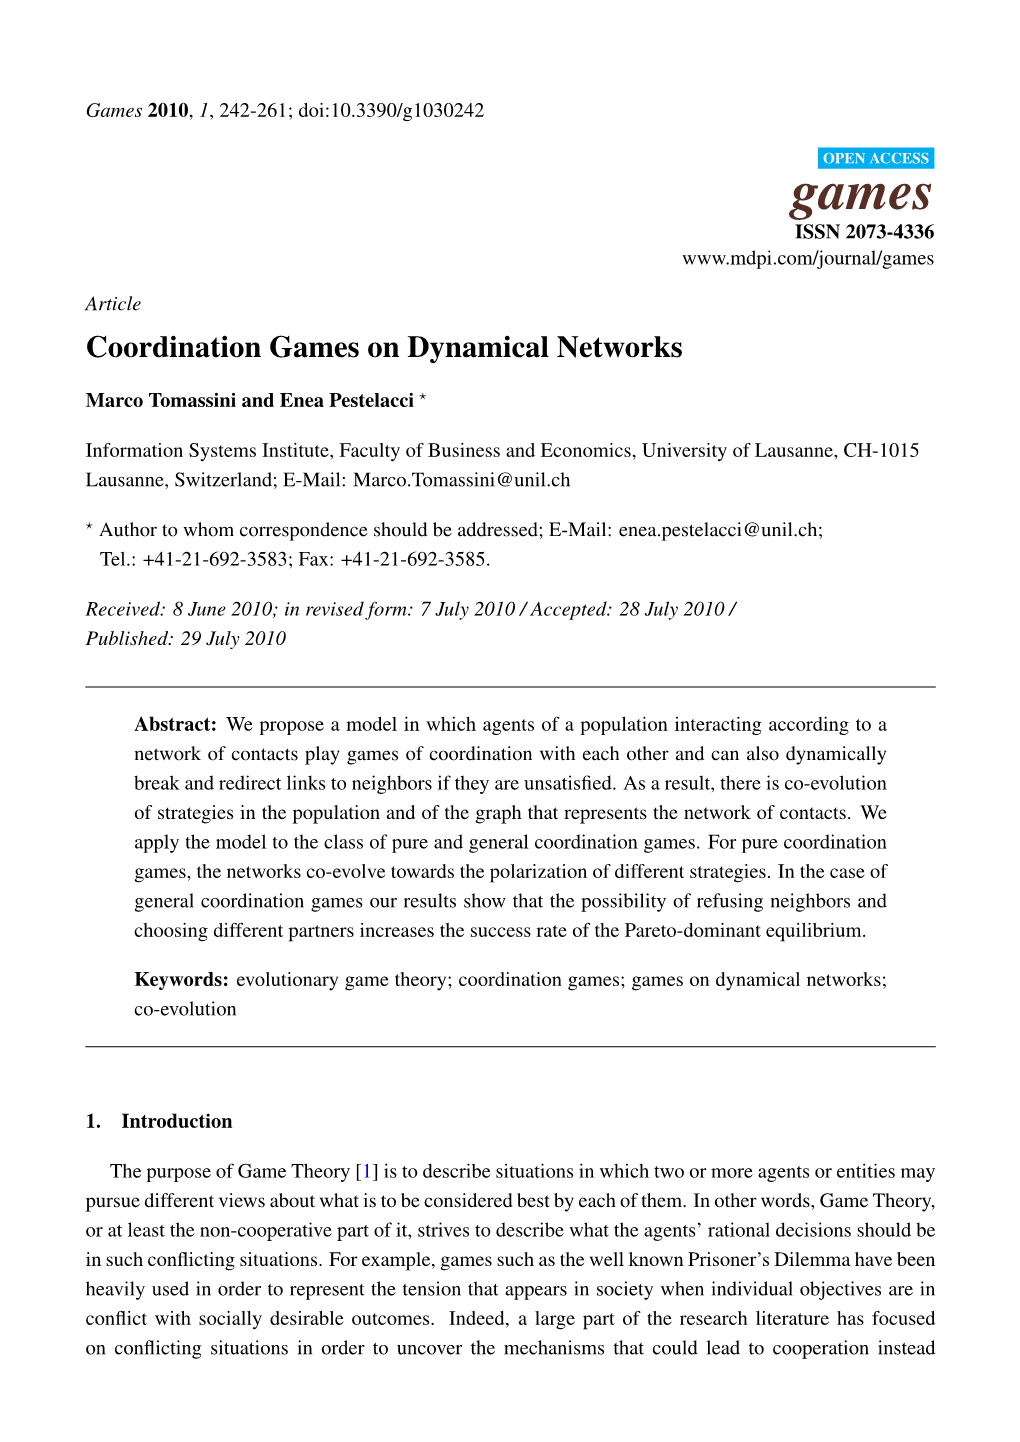 Coordination Games on Dynamical Networks